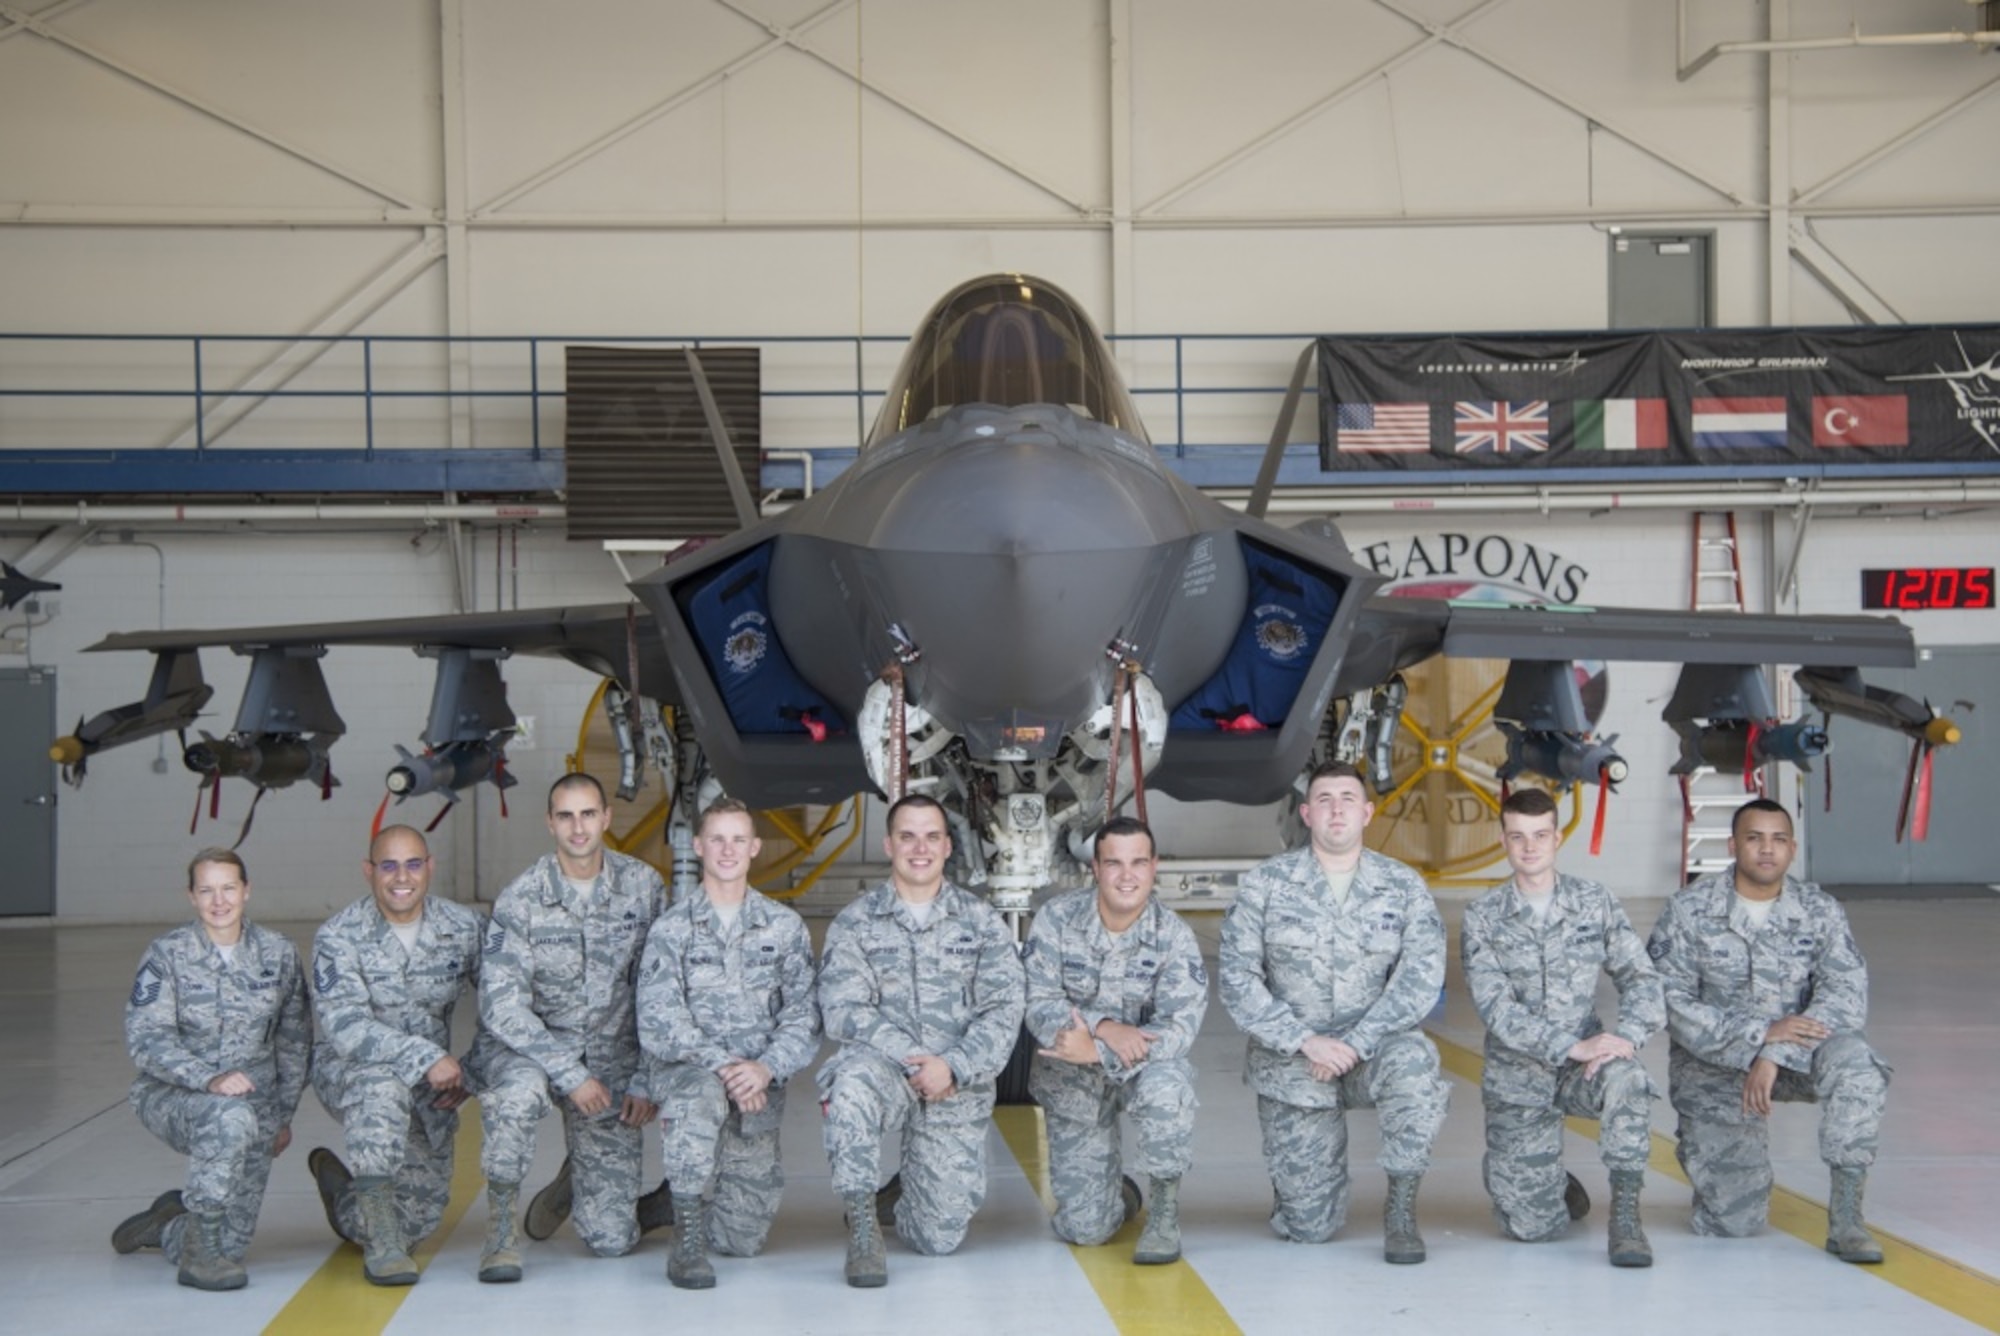 Airmen from the 33rd Aircraft Maintenance Squadron pose for a photo after loading an F-35 with two AIM-9X missiles, four GBU-12 bombs, a GBU-31 bomb, four Small Diameter Bombs, and two AIM-120 missiles July 20, 2016, at Eglin Air Force Base, Fla. This was the first time an F-35A at Eglin AFB was loaded with weapons both internally and on its external pylons. (U.S. Air Force photo by Senior Airman Stormy Archer)